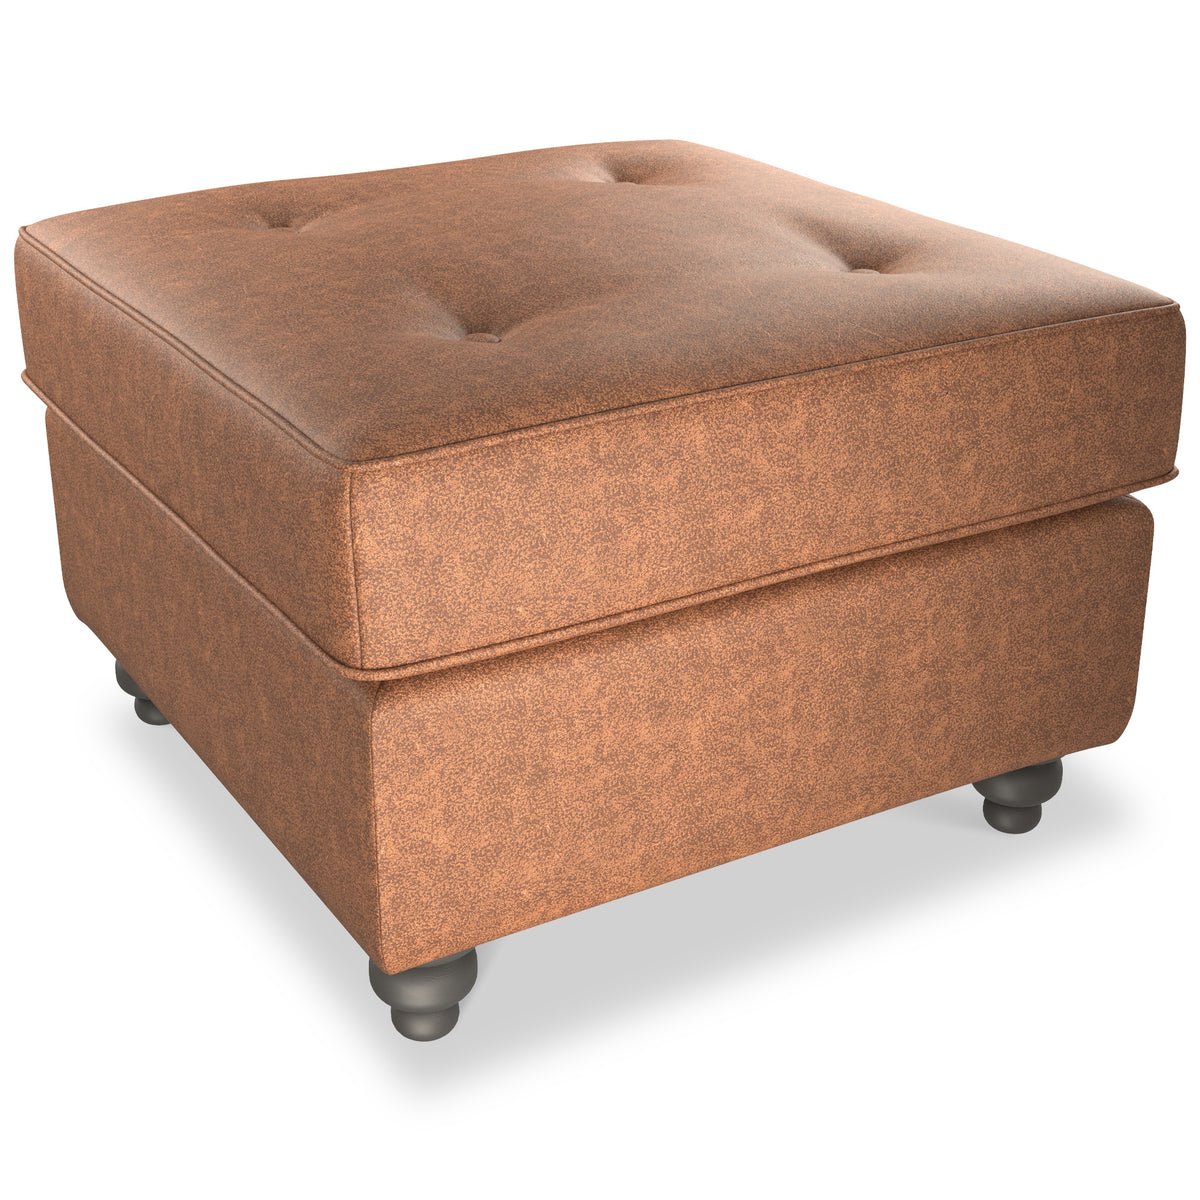 Edward Chocolate Faux Leather Footstool from Roseland Furniture